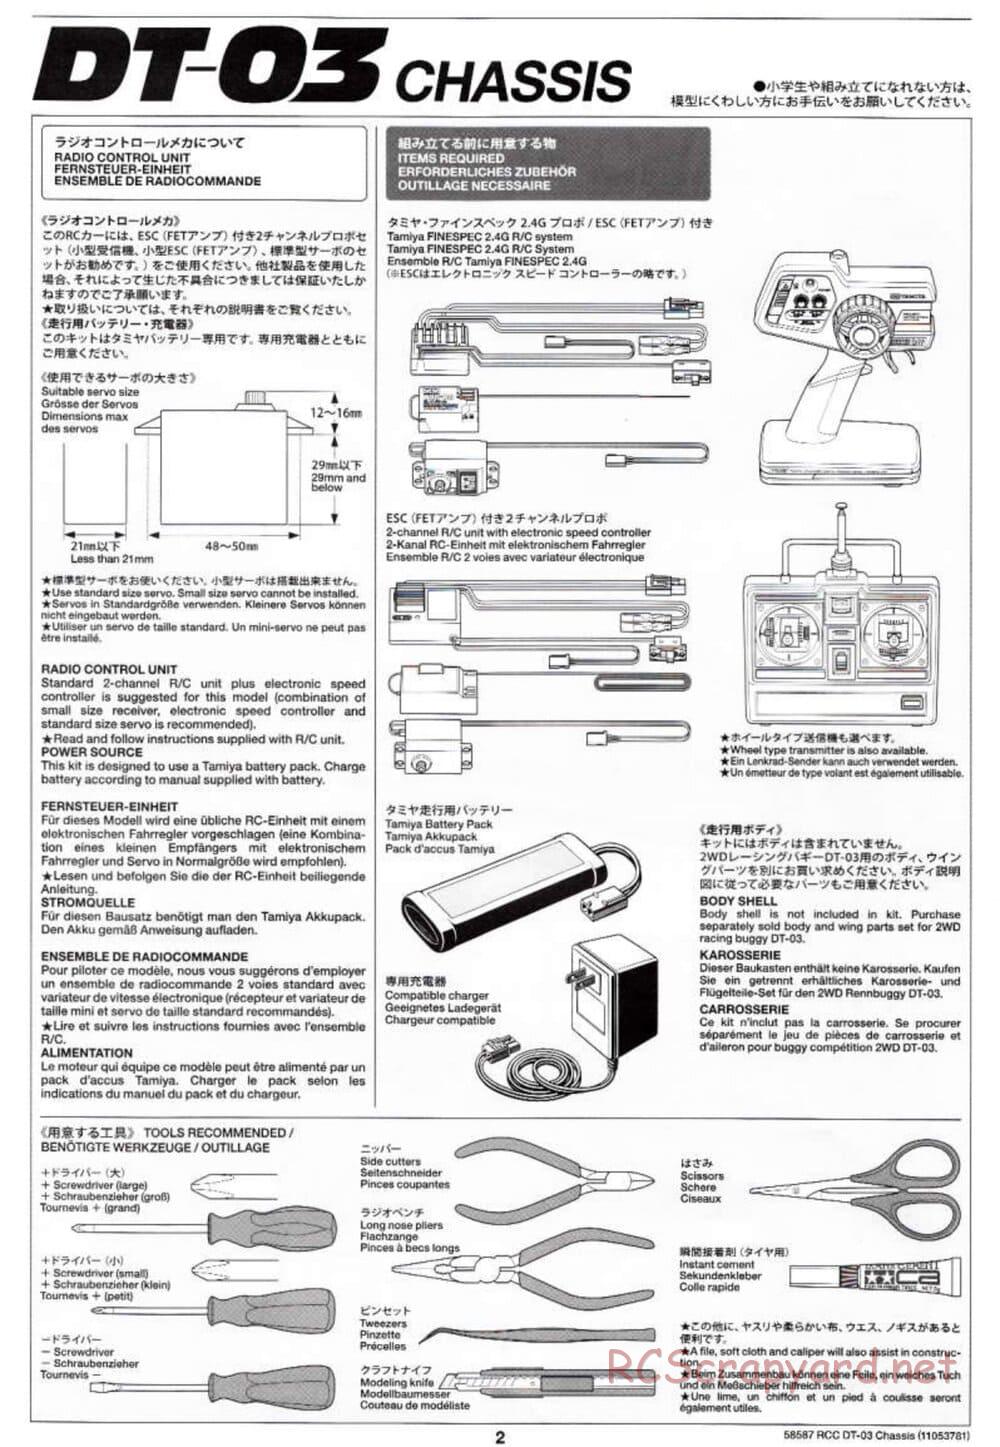 Tamiya - Neo Fighter Buggy Chassis - Manual - Page 2